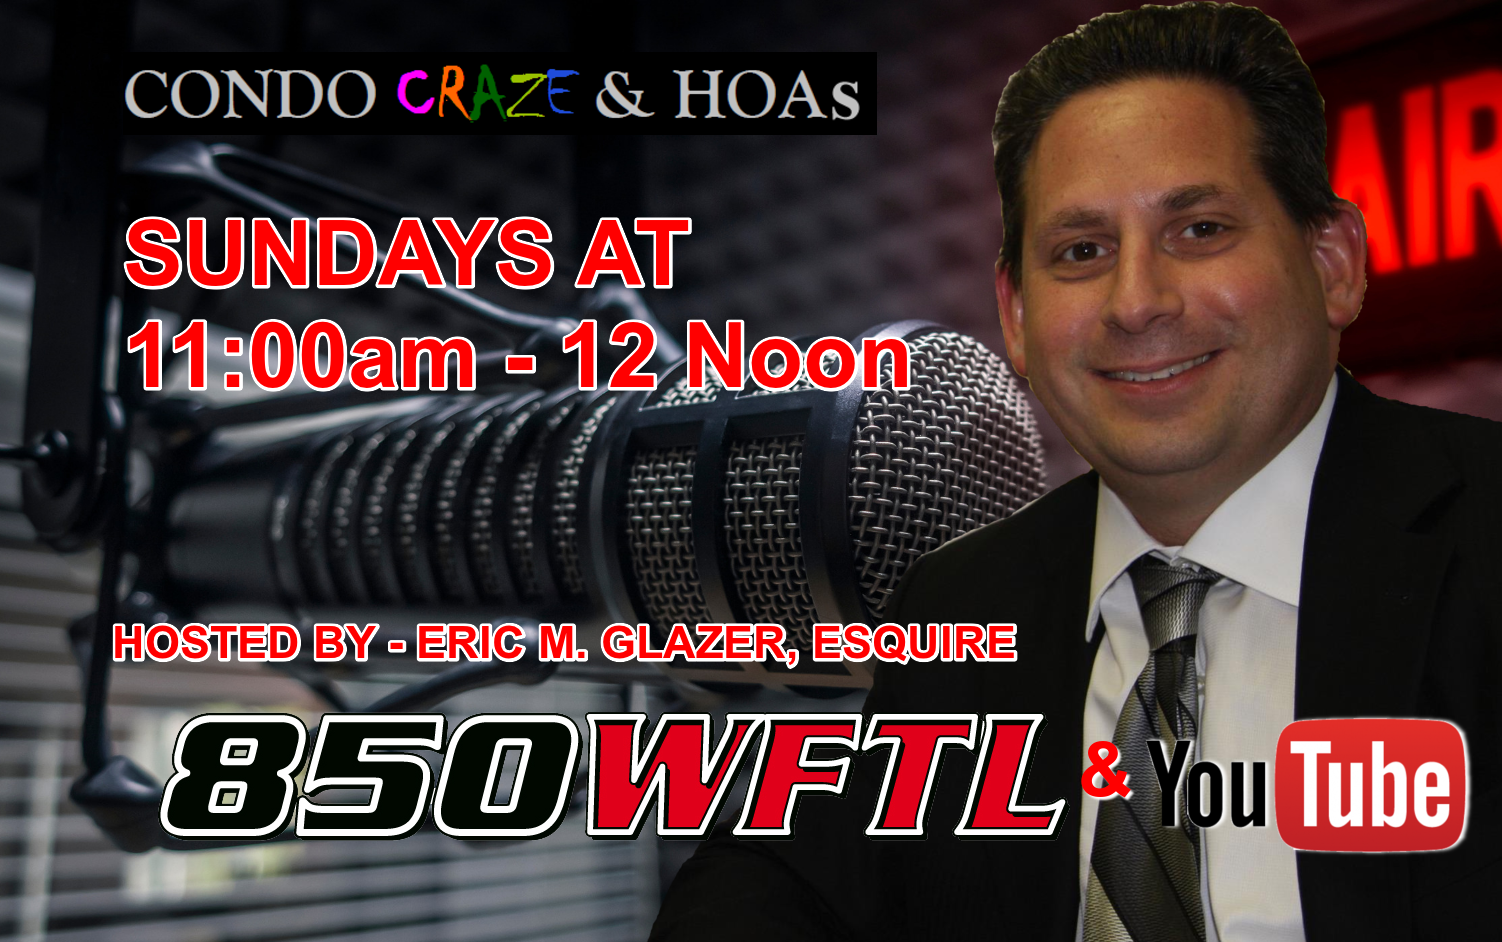 Tune into Condo Craze and HOAs – Sunday at 11 am ON 850 WFTL OR ON YOU TUBE